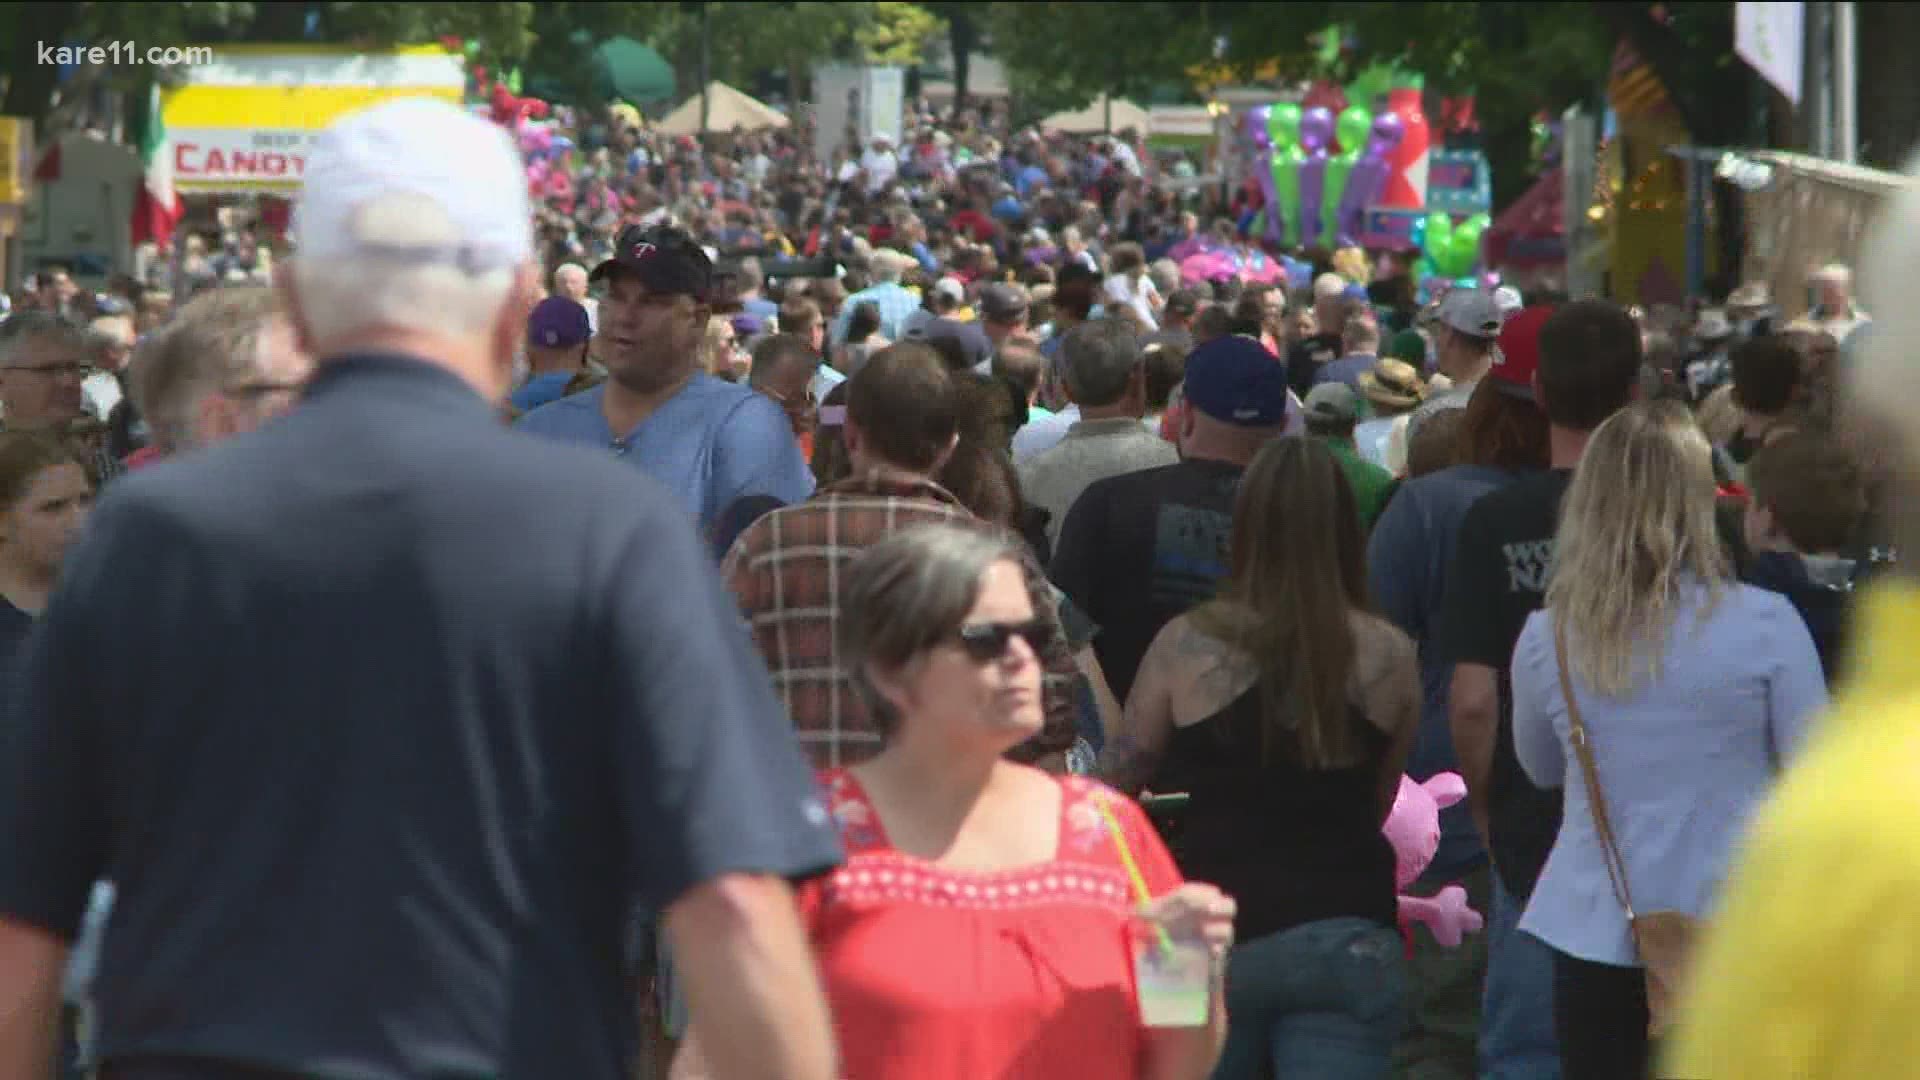 The Minnesota State Fair is coming up, but there aren't any law enforcement set to keep the fairgrounds secure.